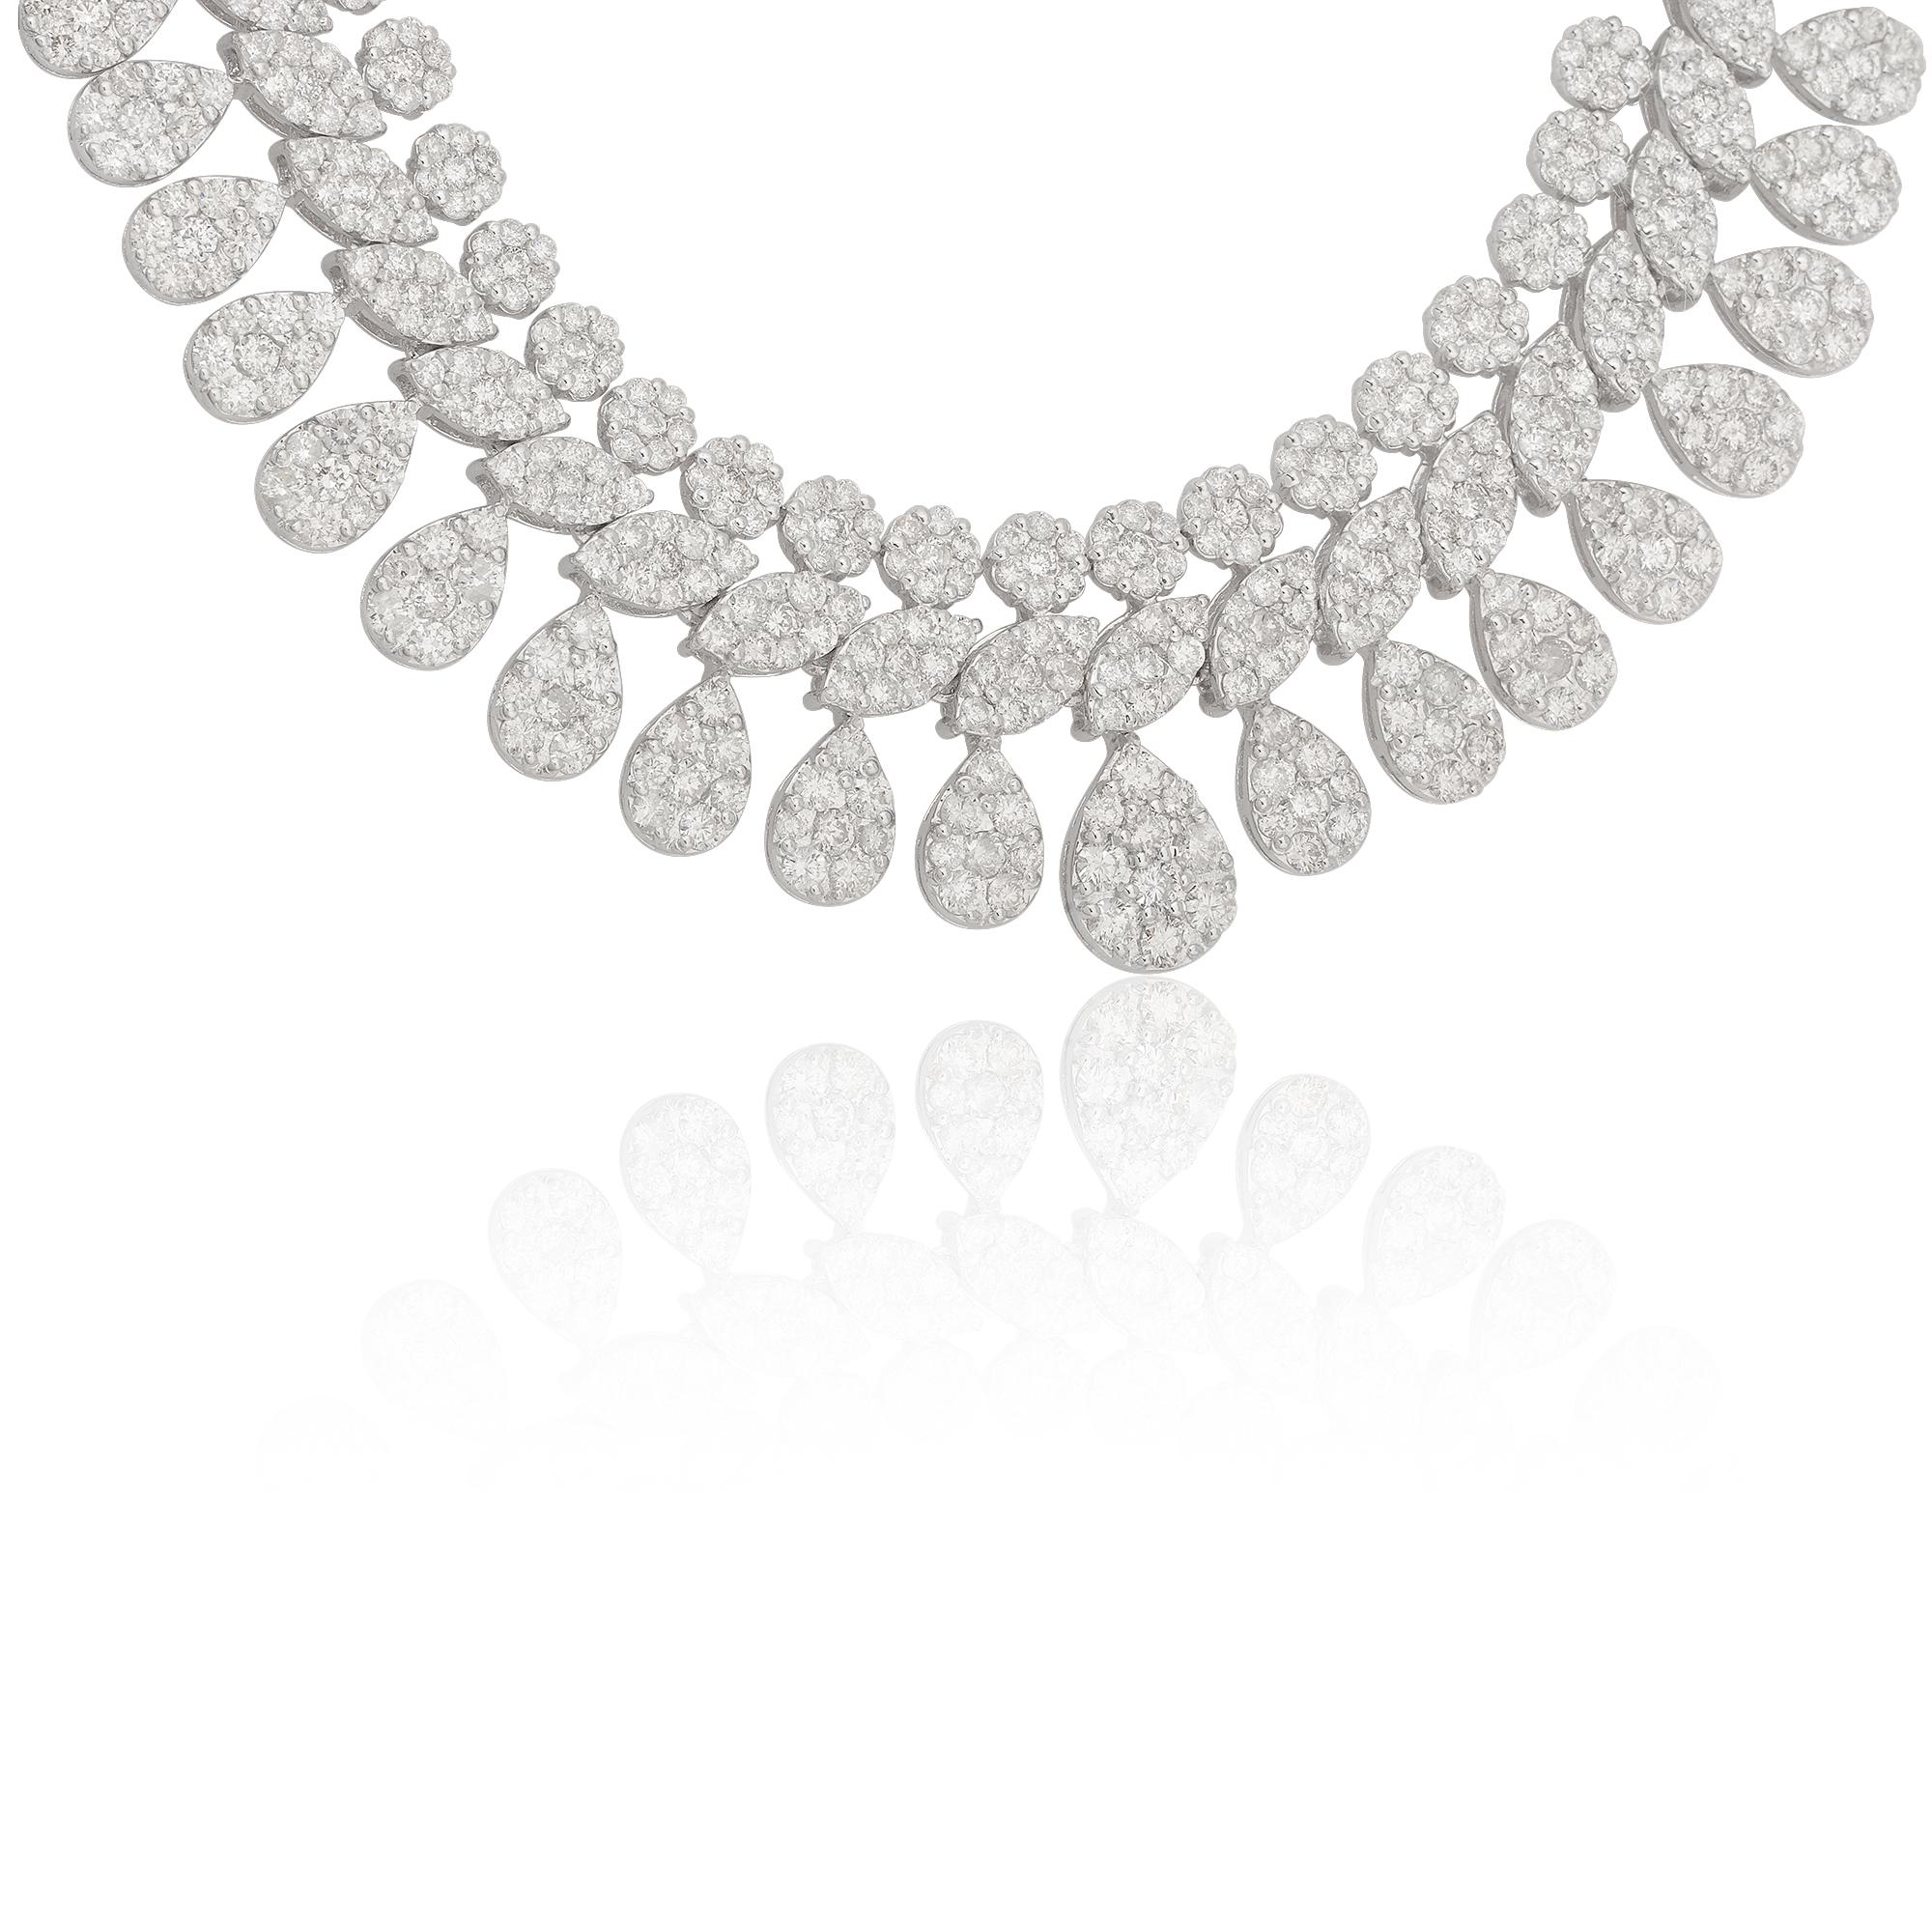 Prepare to be captivated by the extraordinary brilliance of this 20.6 Carat SI Clarity HI Color Diamond Choker Necklace. Meticulously handcrafted with meticulous attention to detail, this exceptional piece features a dazzling array of round-cut